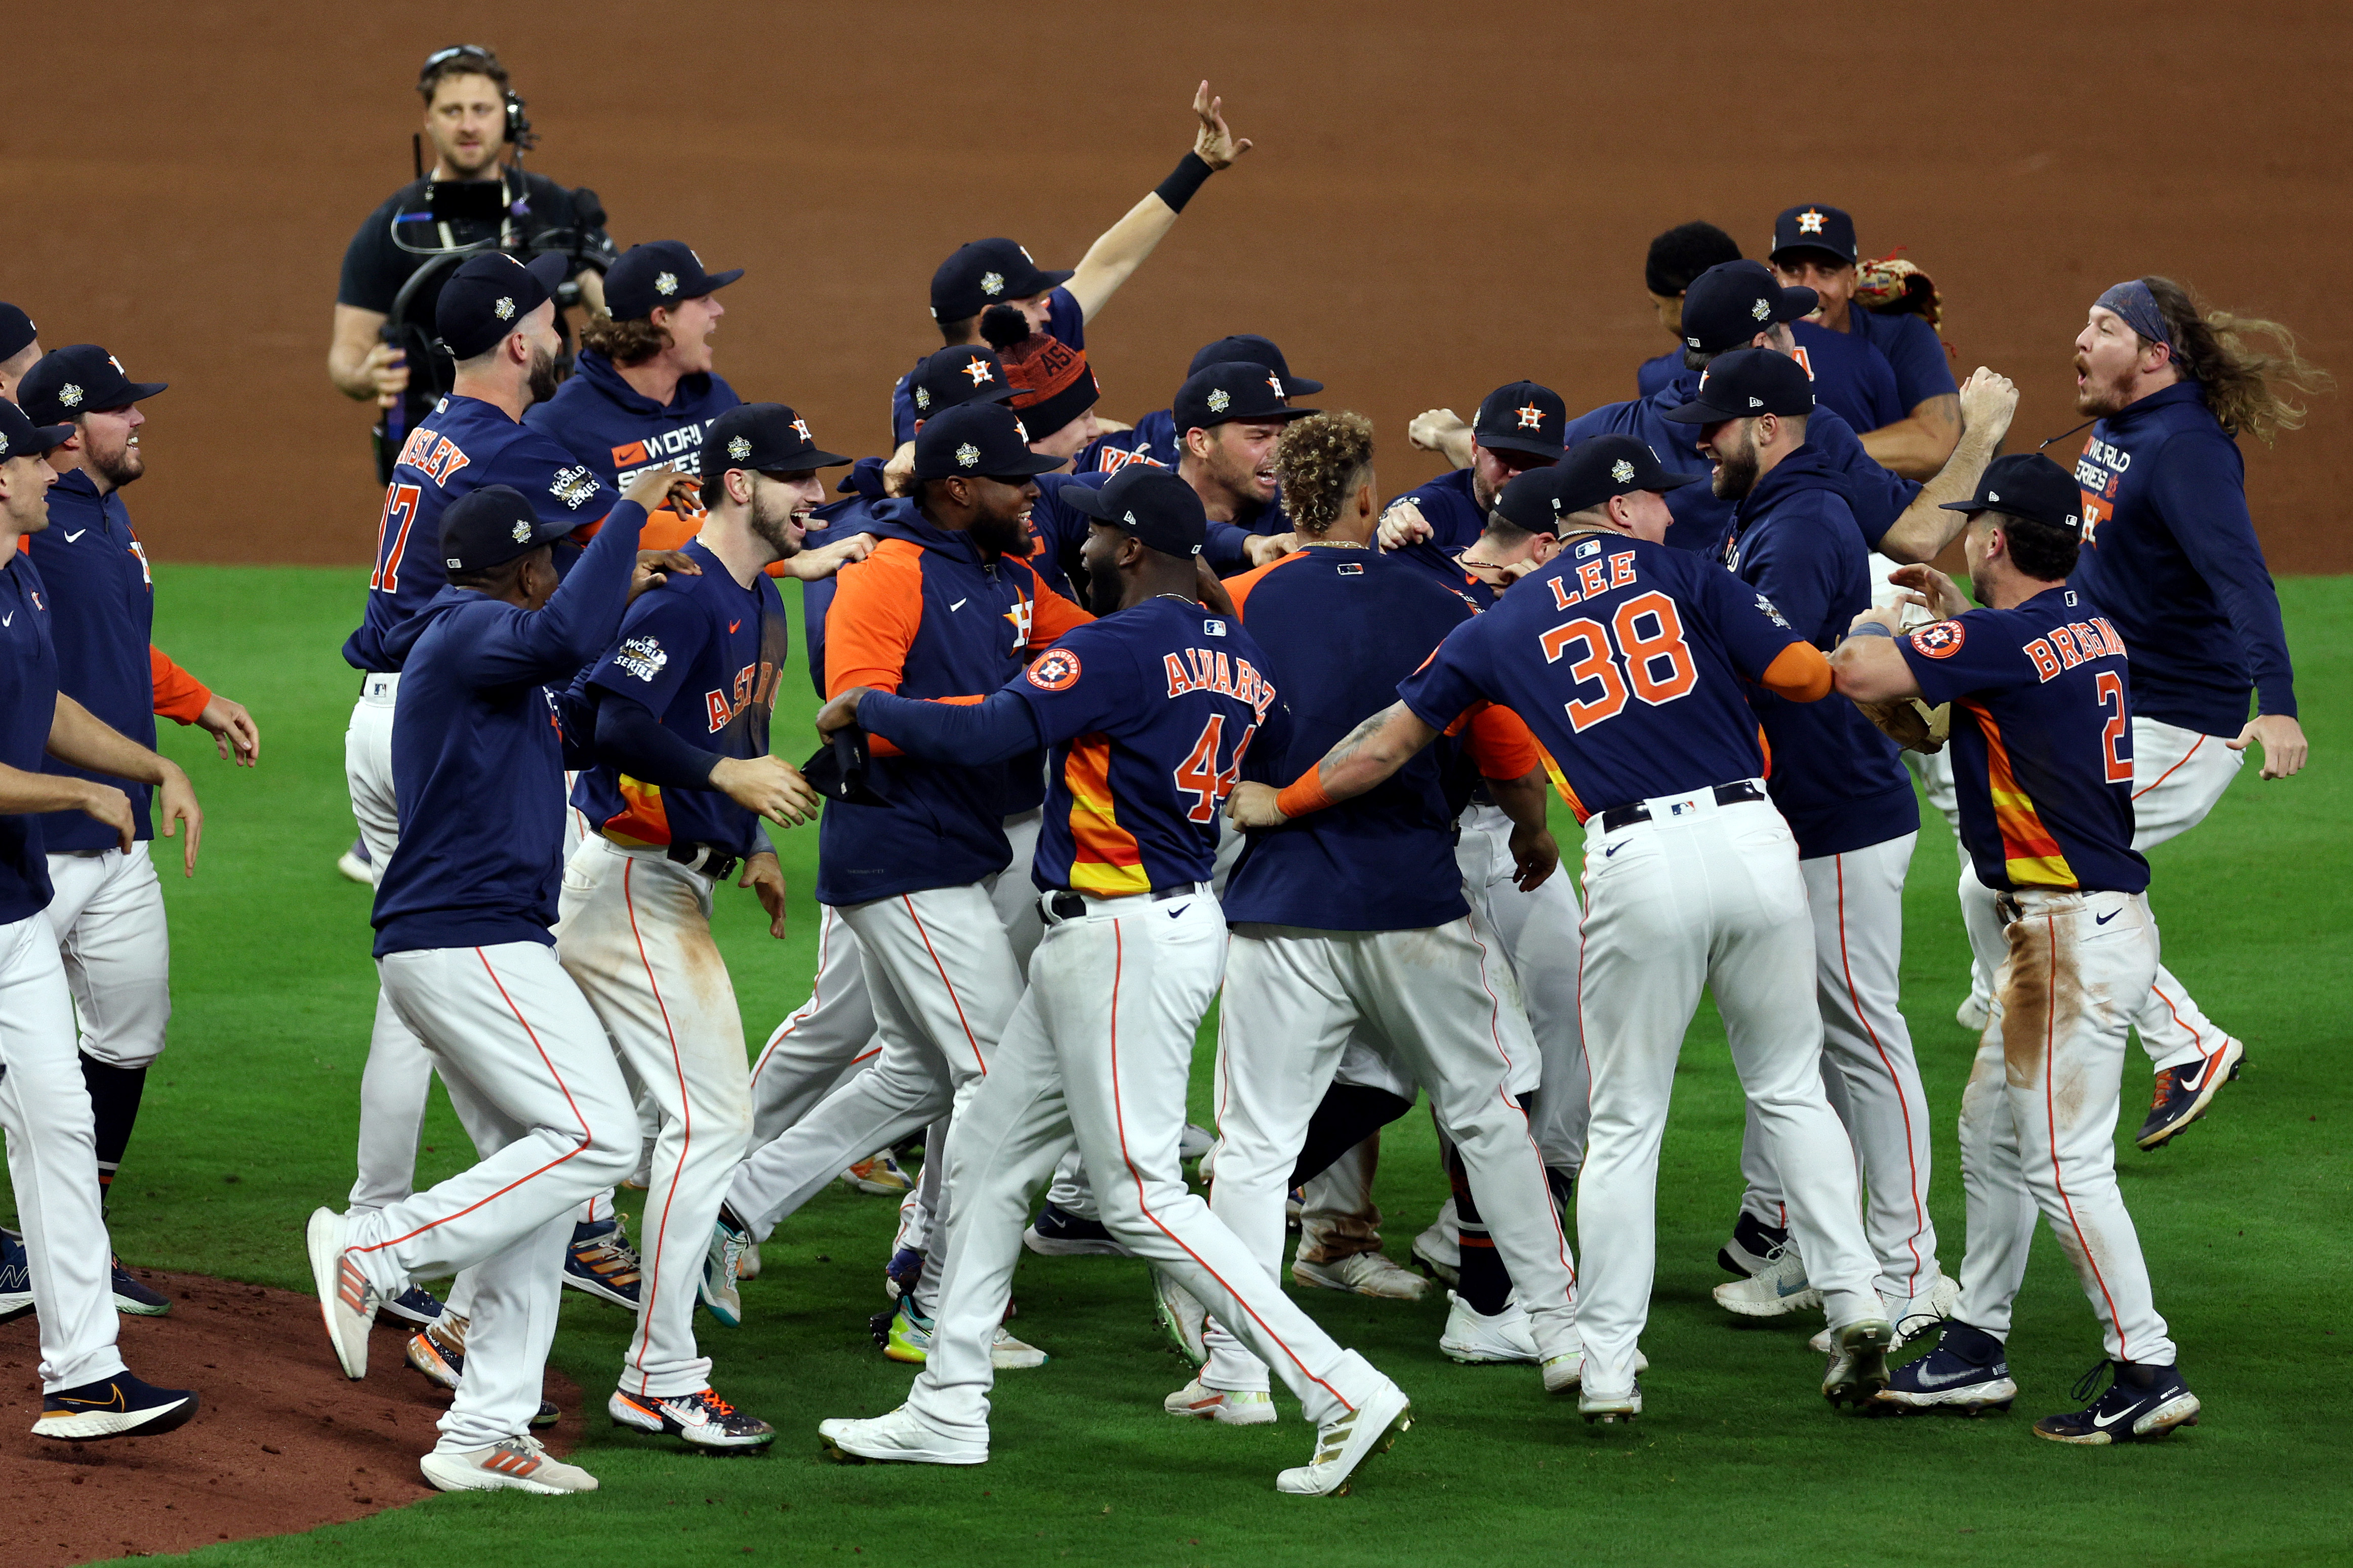 PURE JOY: See the smiles on the field as the Houston Astros celebrate  another World Championship